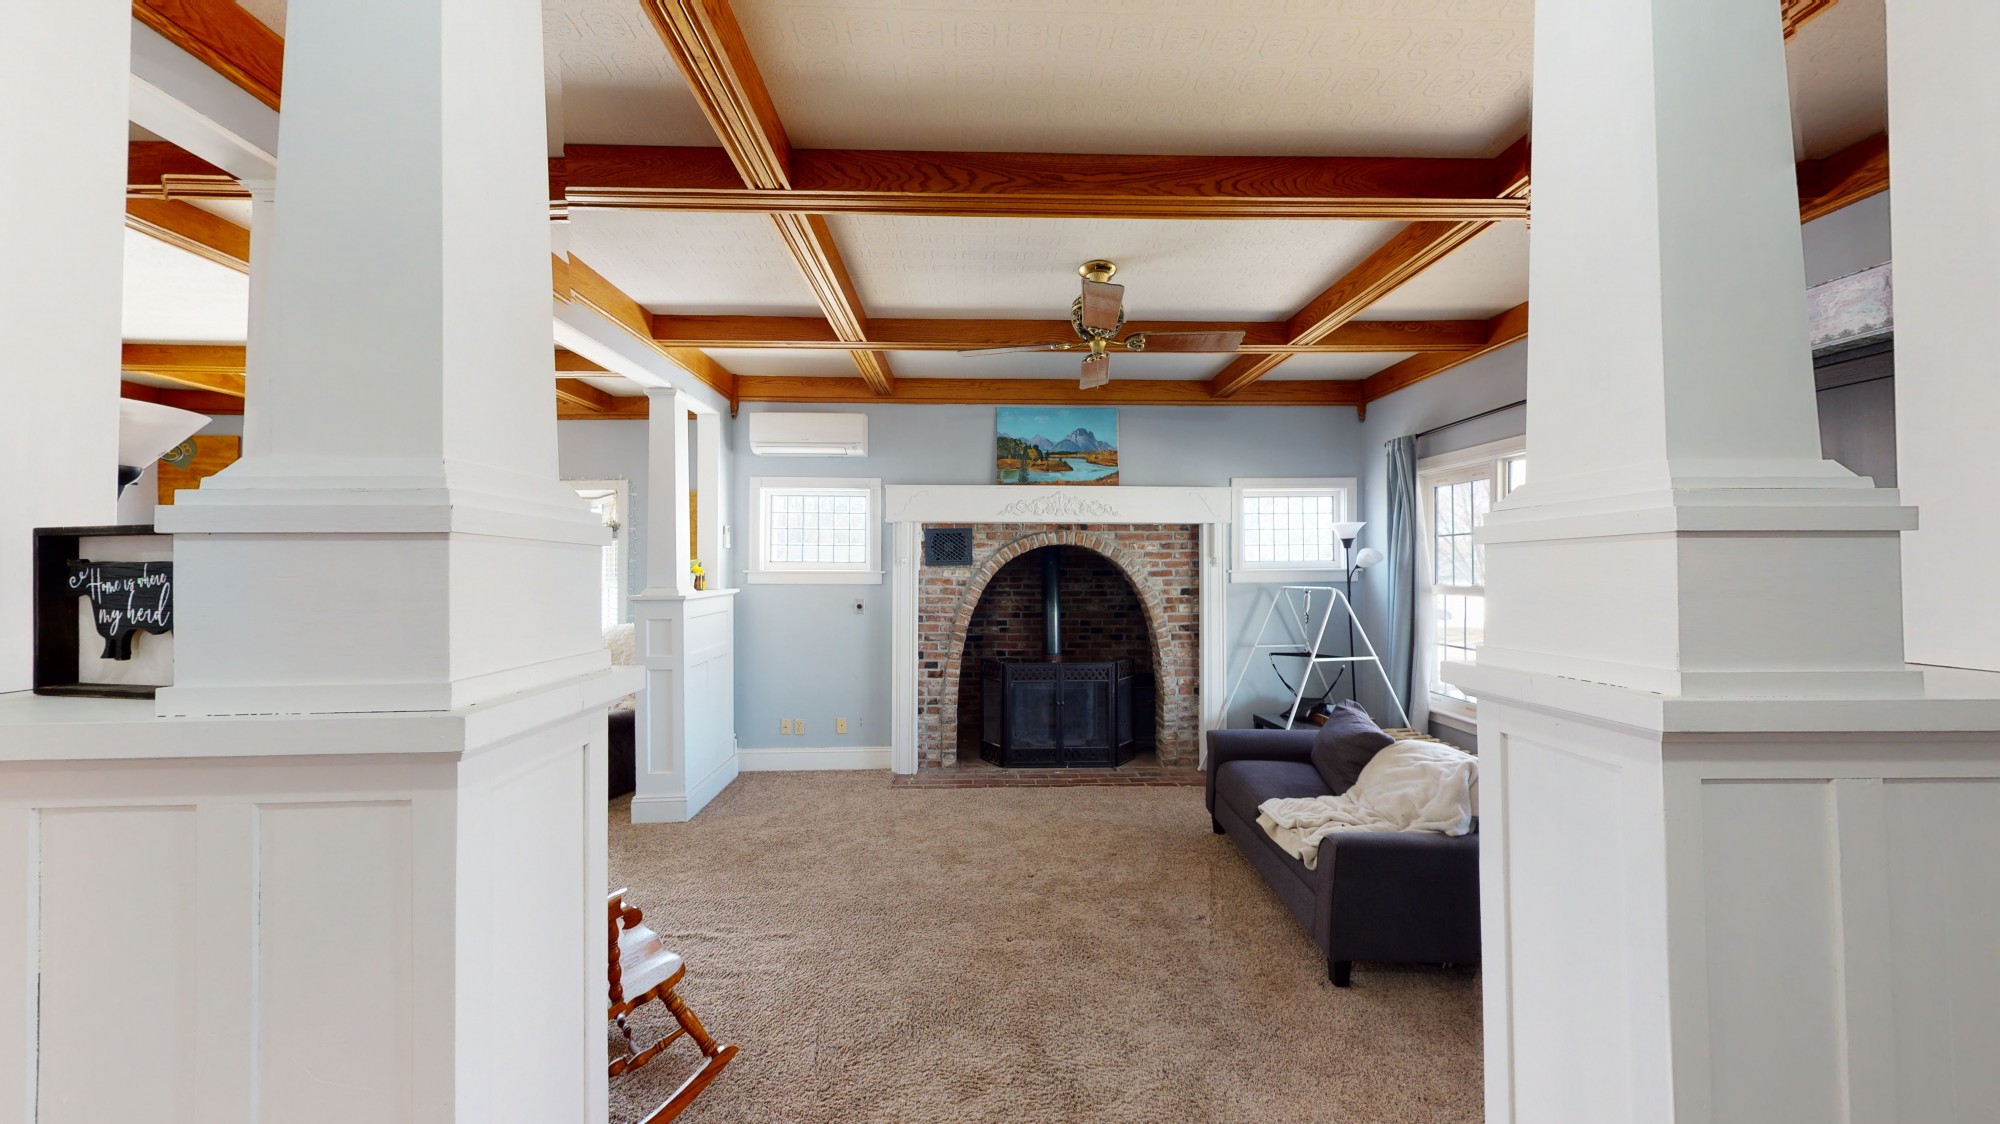 Living Room #2 with Fireplace 
Craftsman Style Woodwork